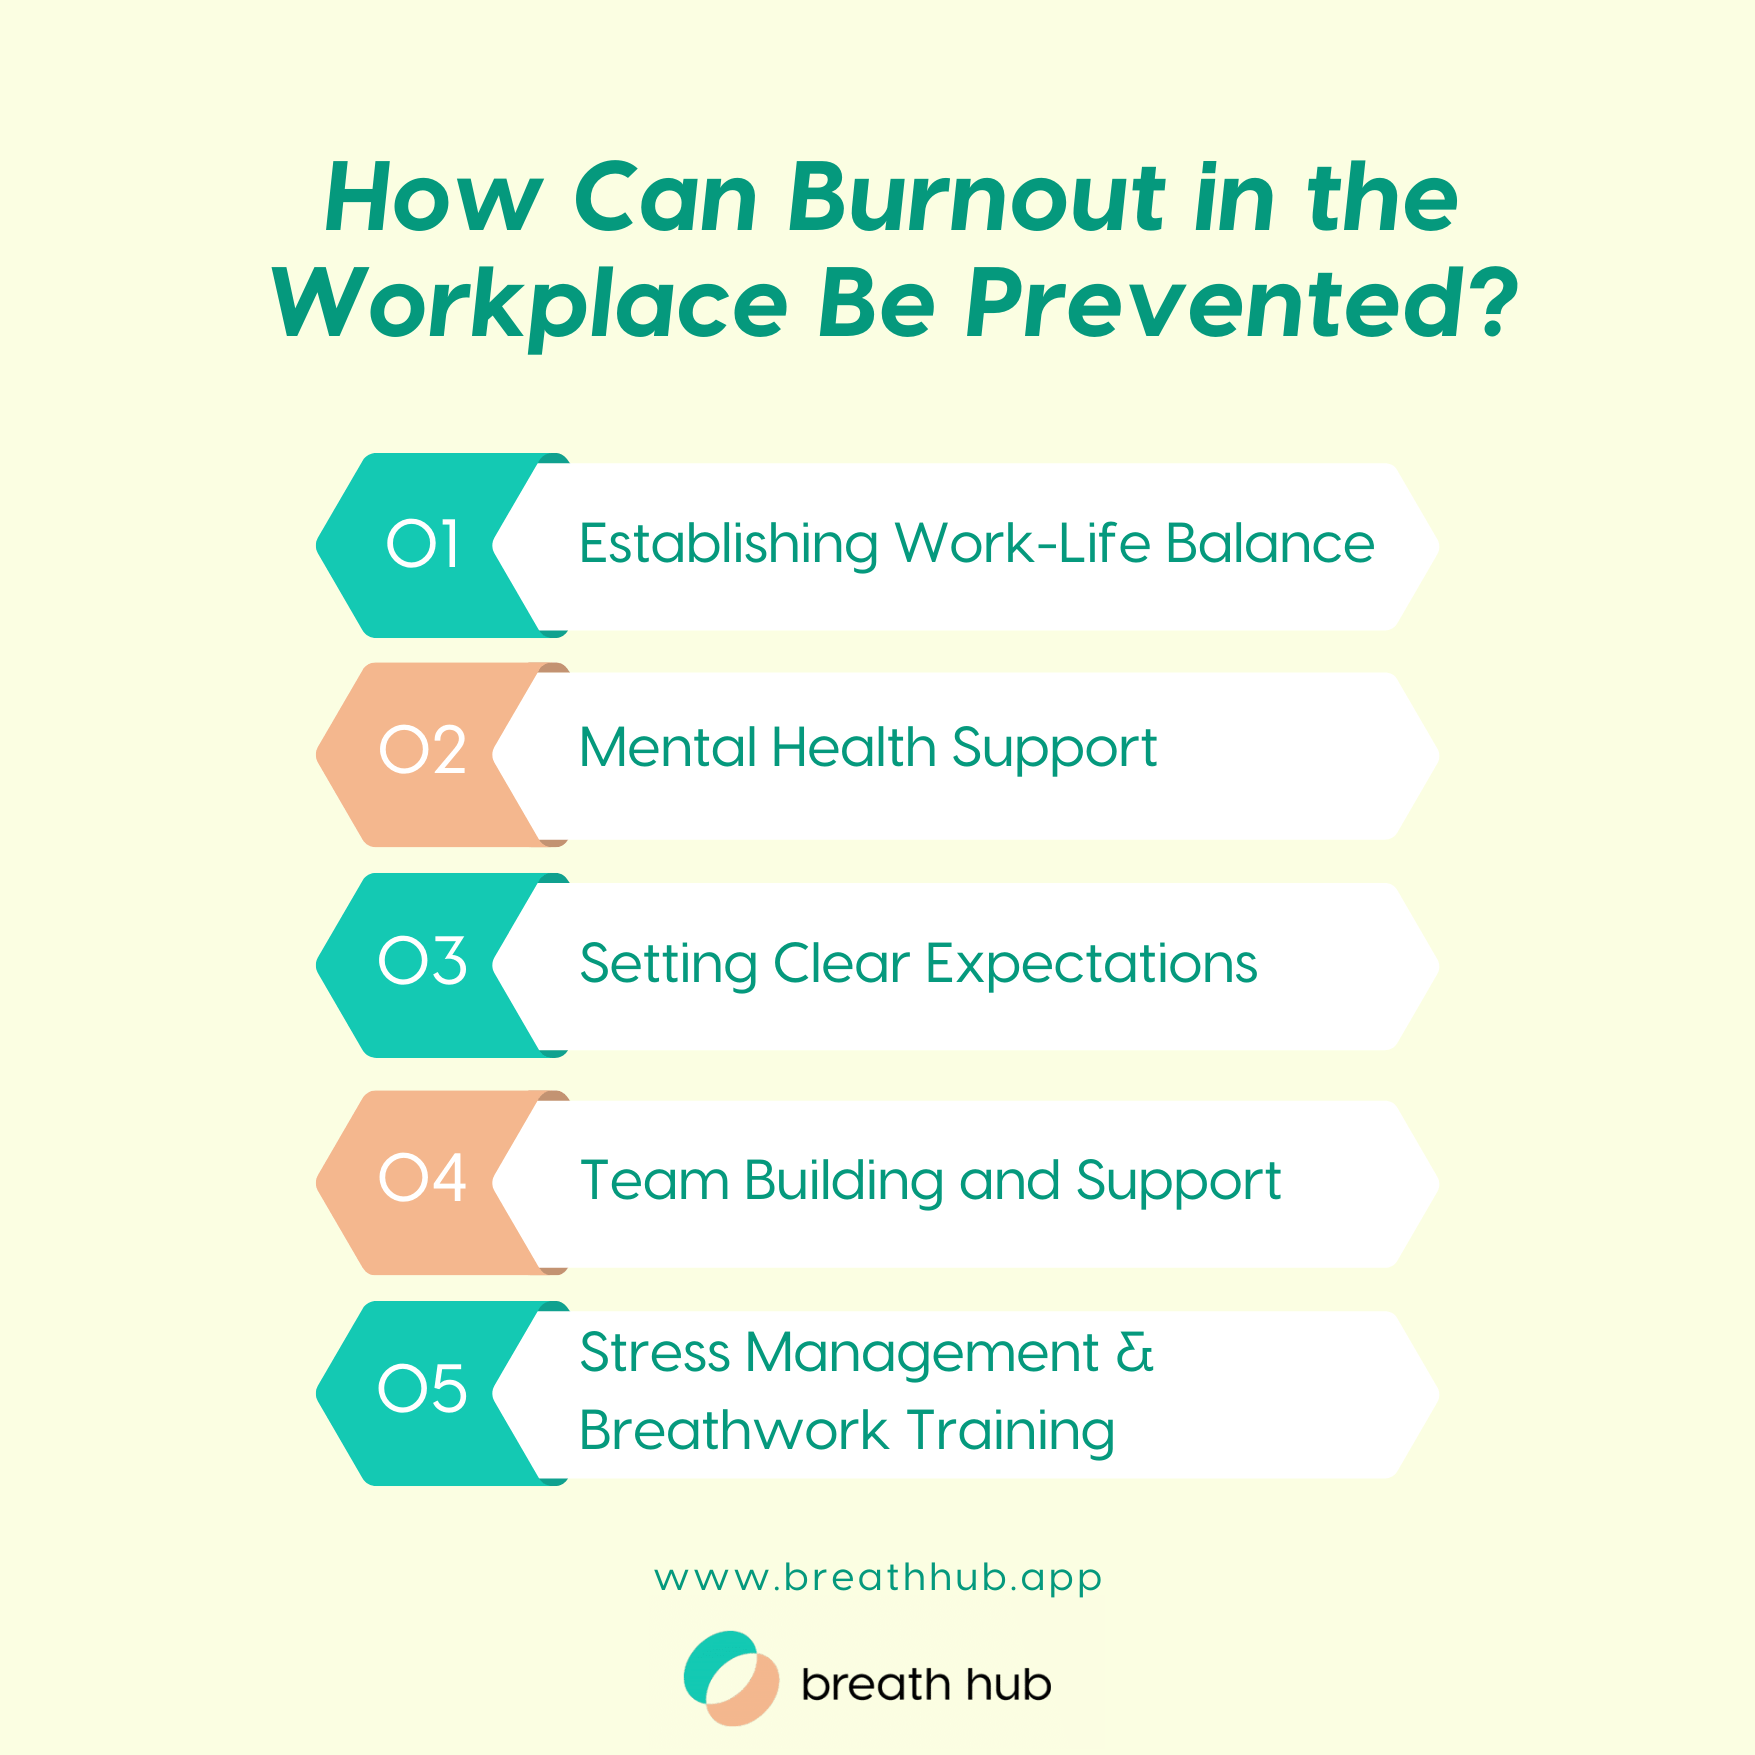 How to Prevent Burnout in the Workplace? - Breath Hub